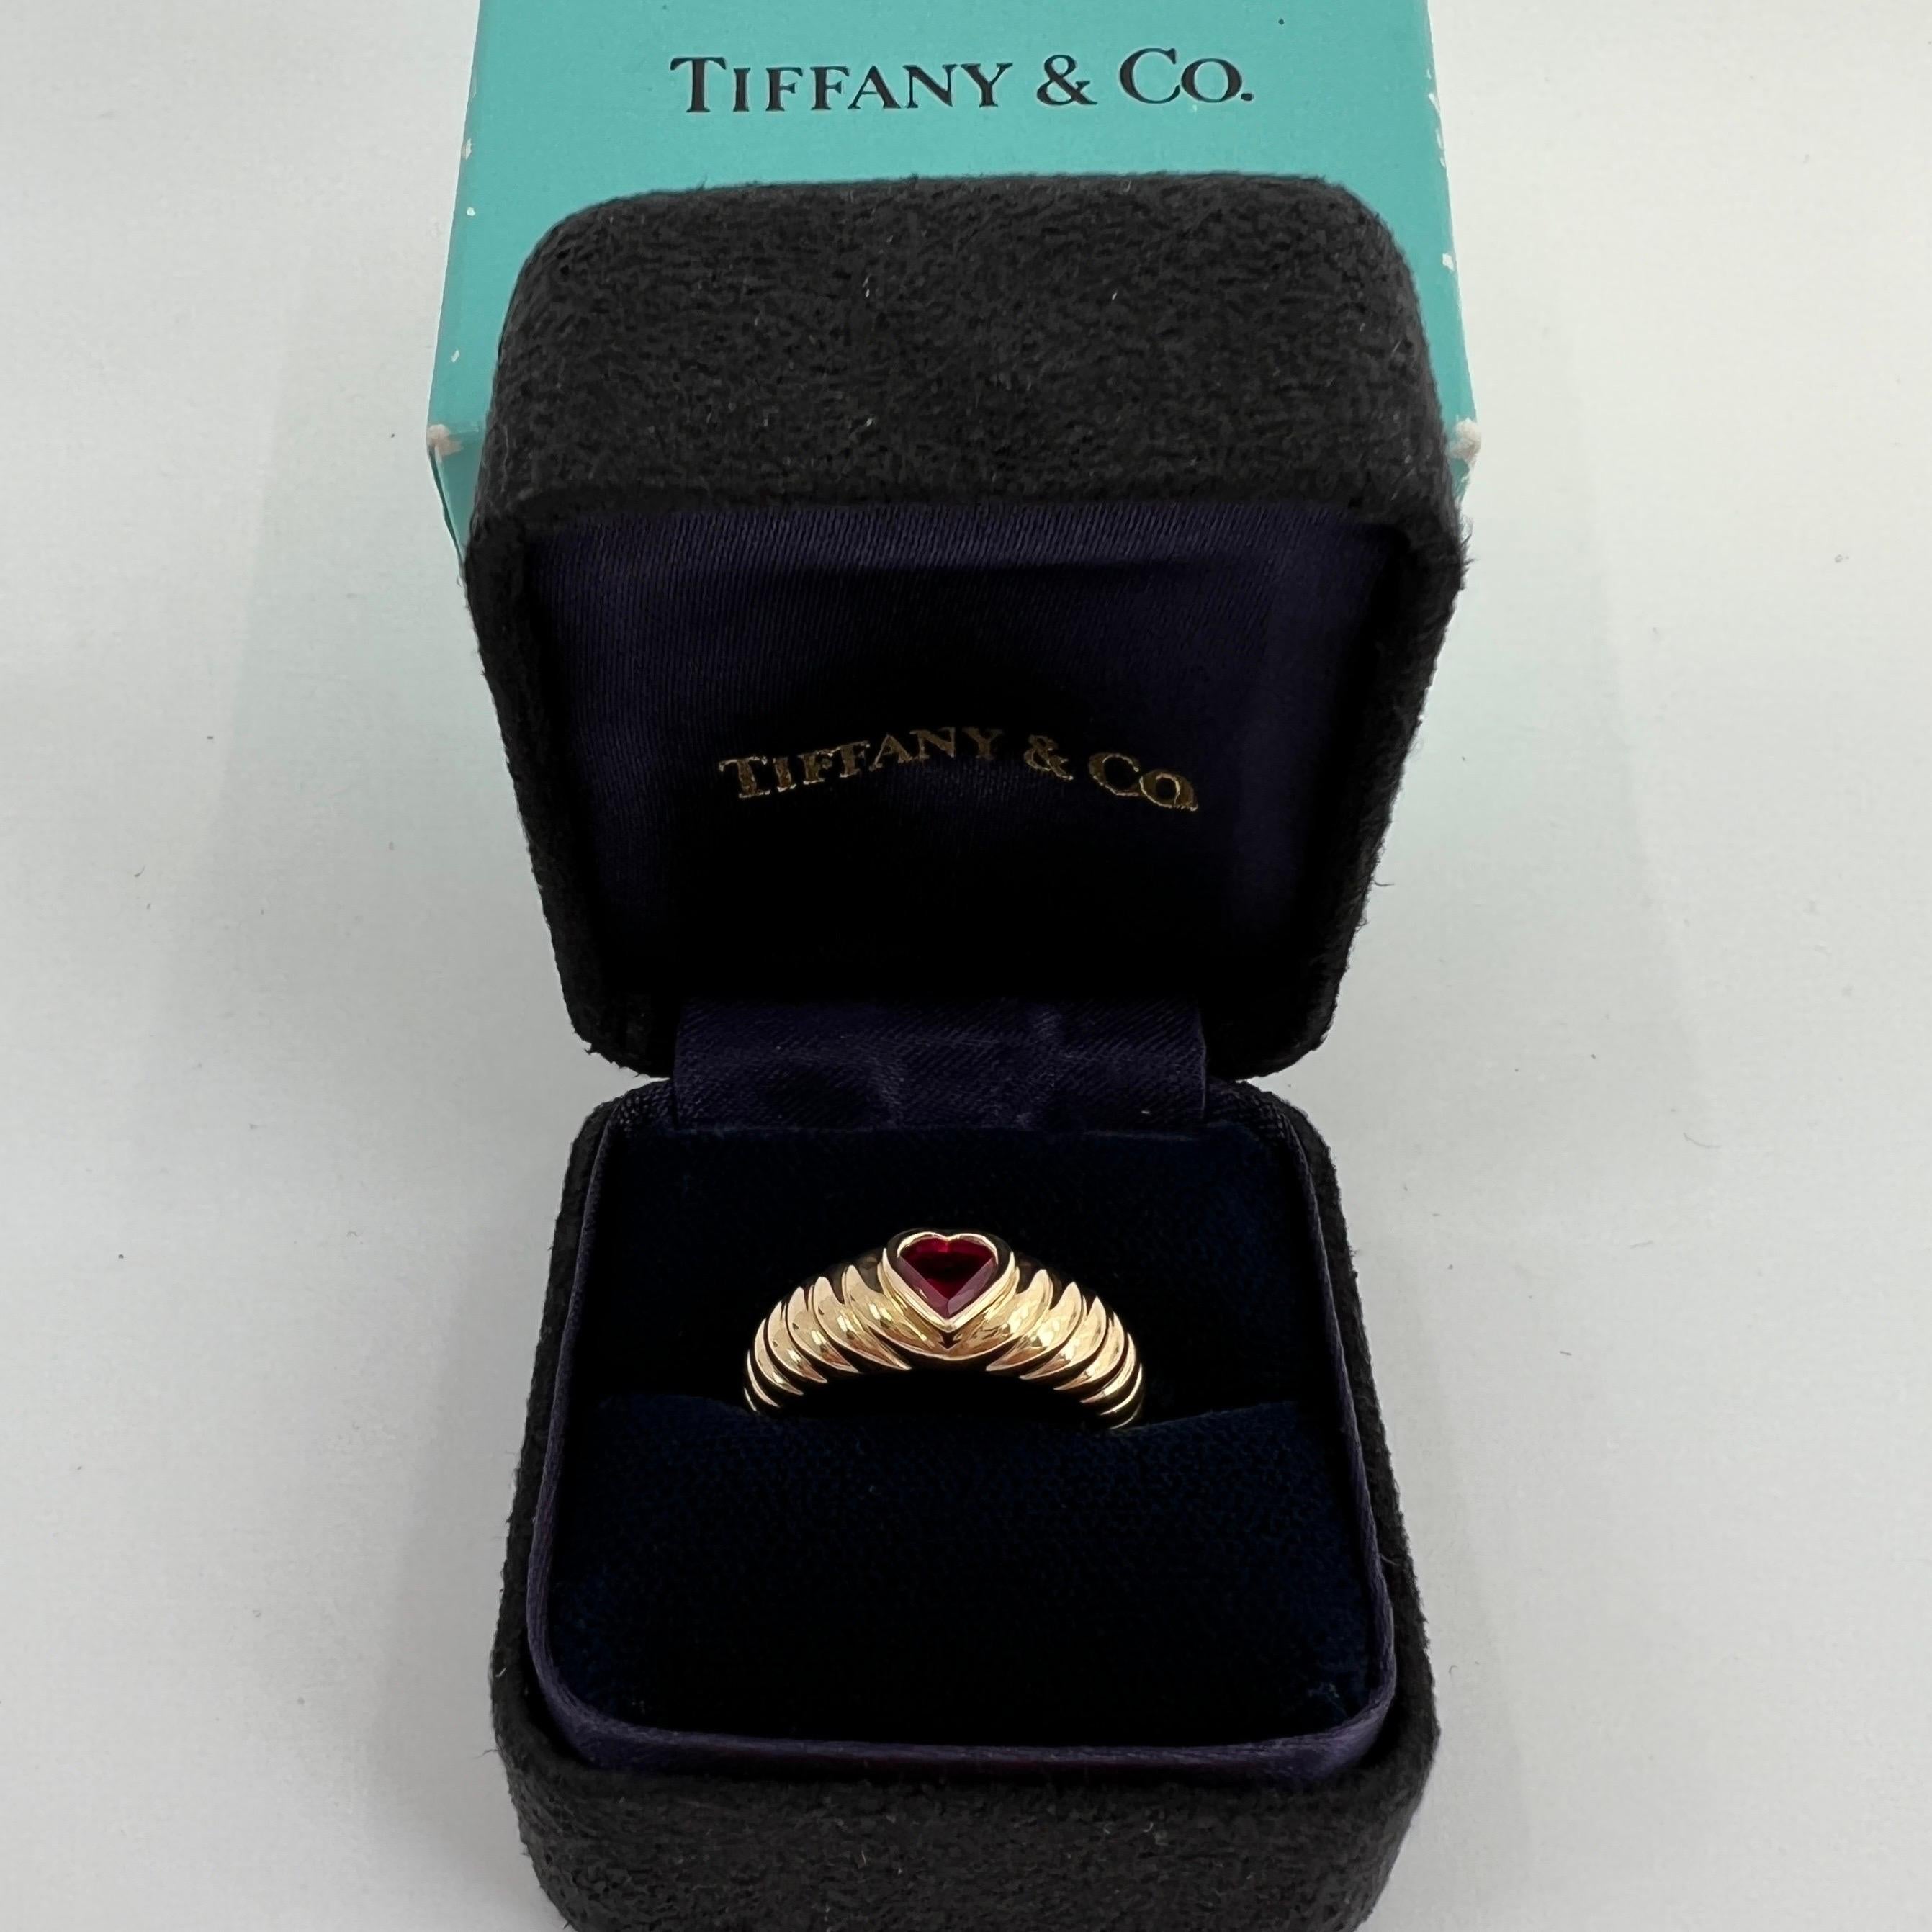 Weinlese Tiffany & Co. Vivid Blood Red Ruby Heart Cut 18k Gelbgold Band Ring (Herzschliff)